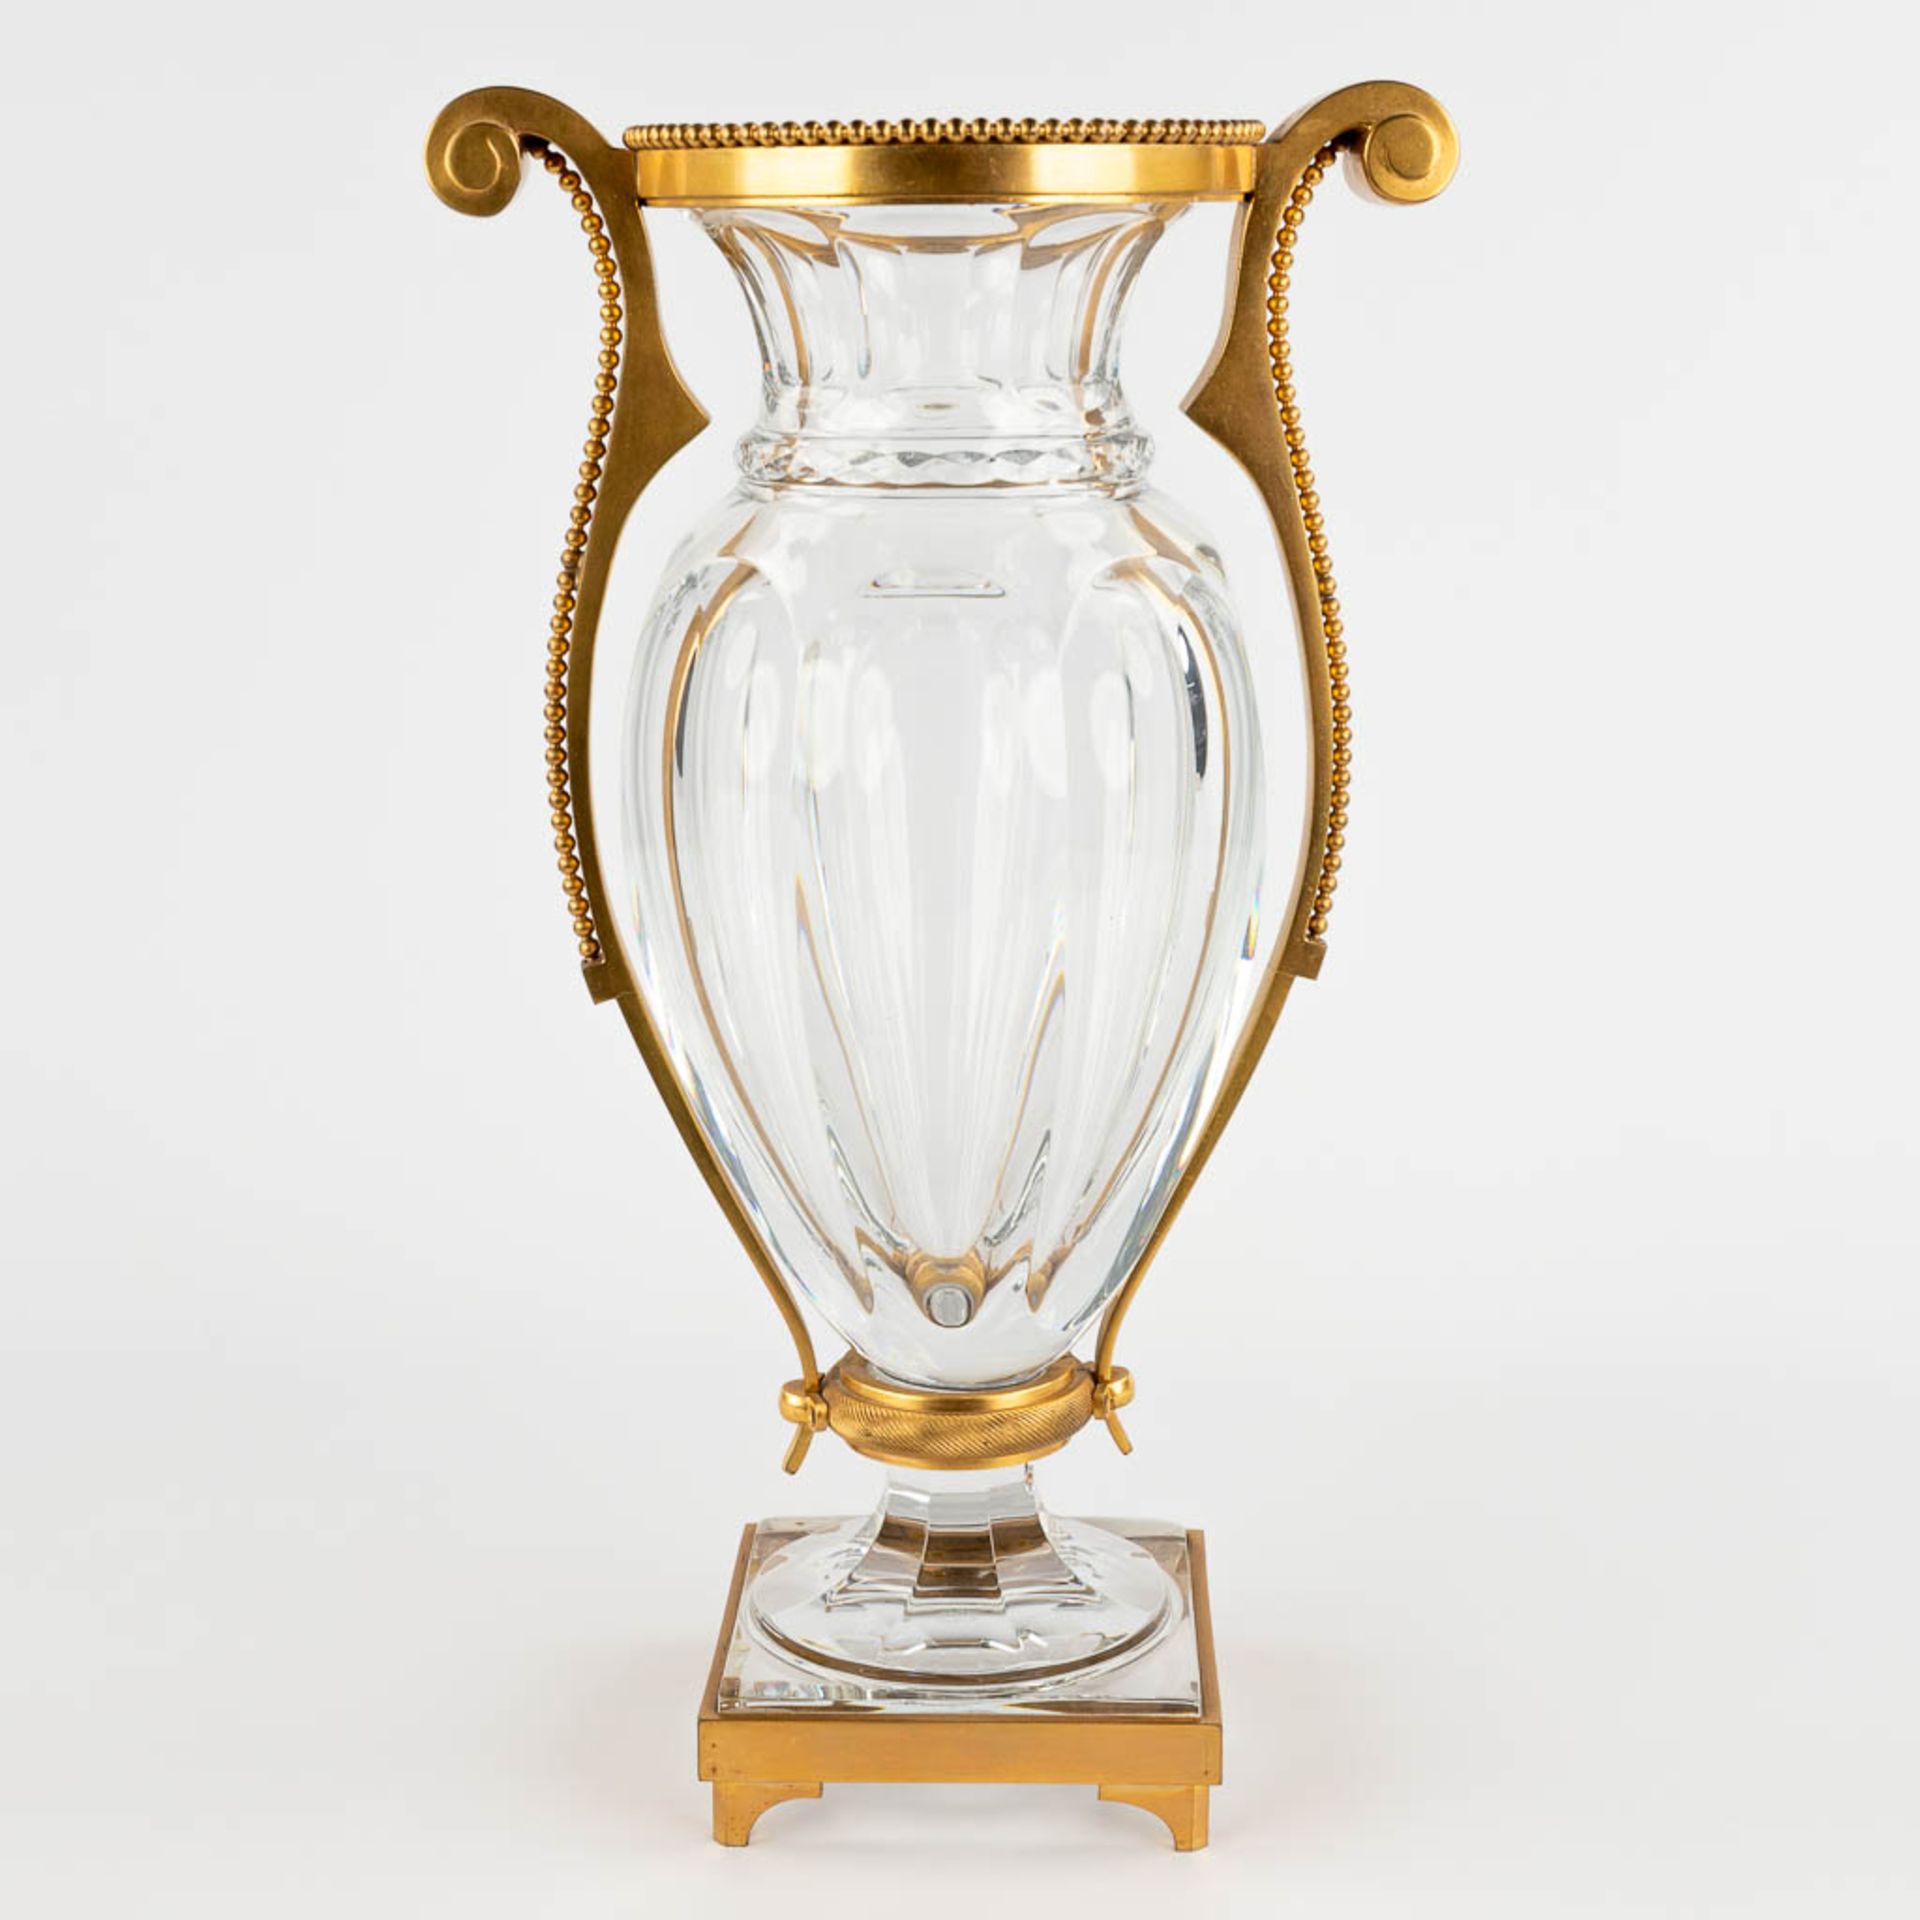 Baccarat, a large crystal vase mounted with gilt bronze. 20th C. (D:14 x W:22 x H:38,5 cm) - Image 5 of 12